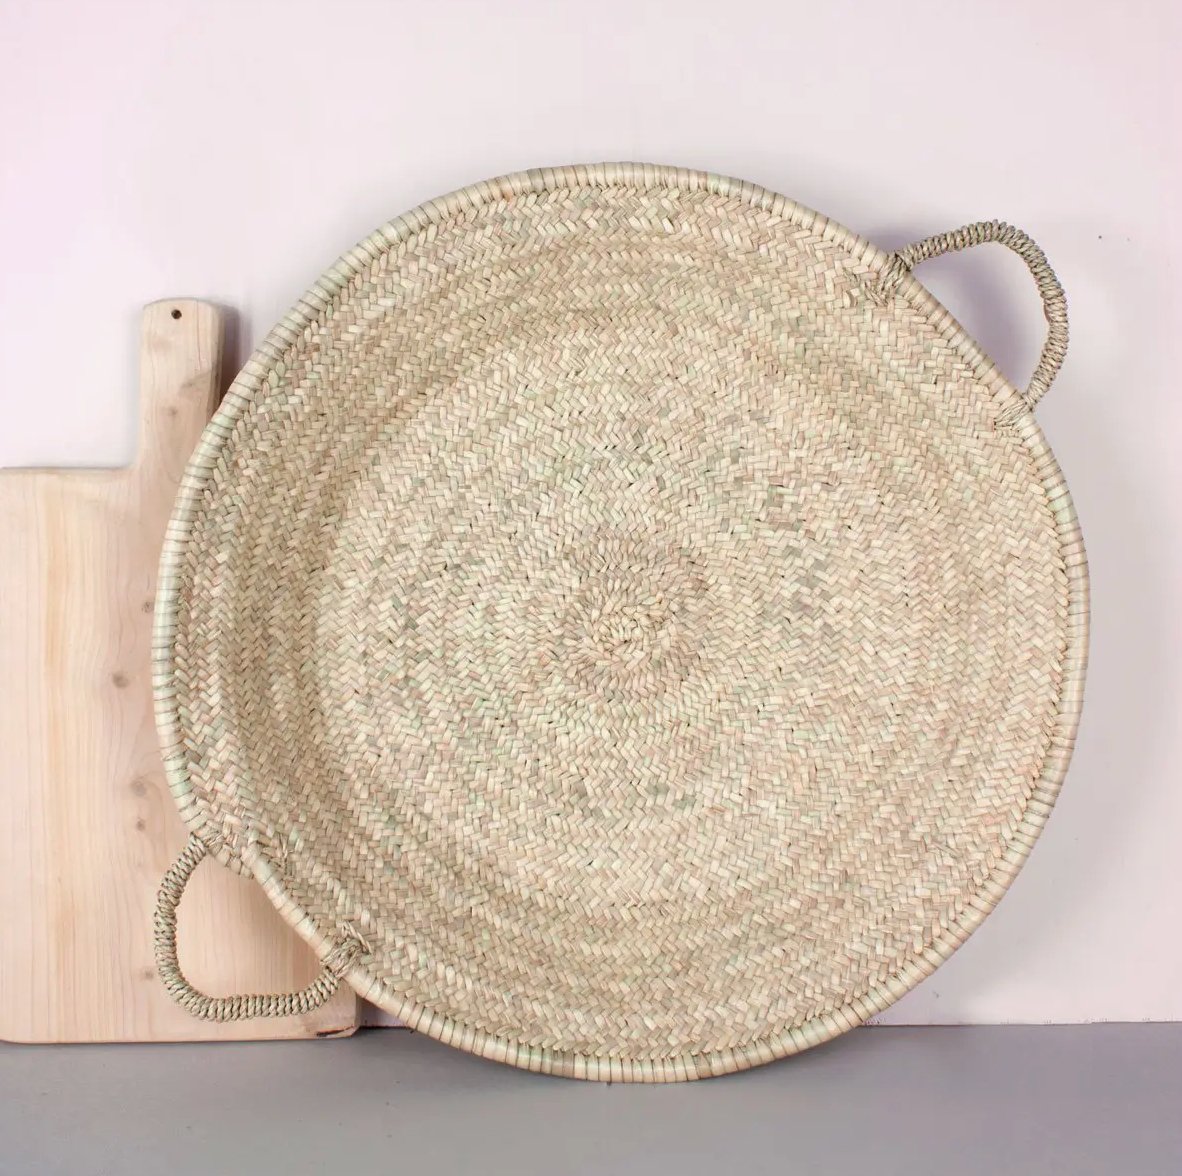 Oversized Woven Plate